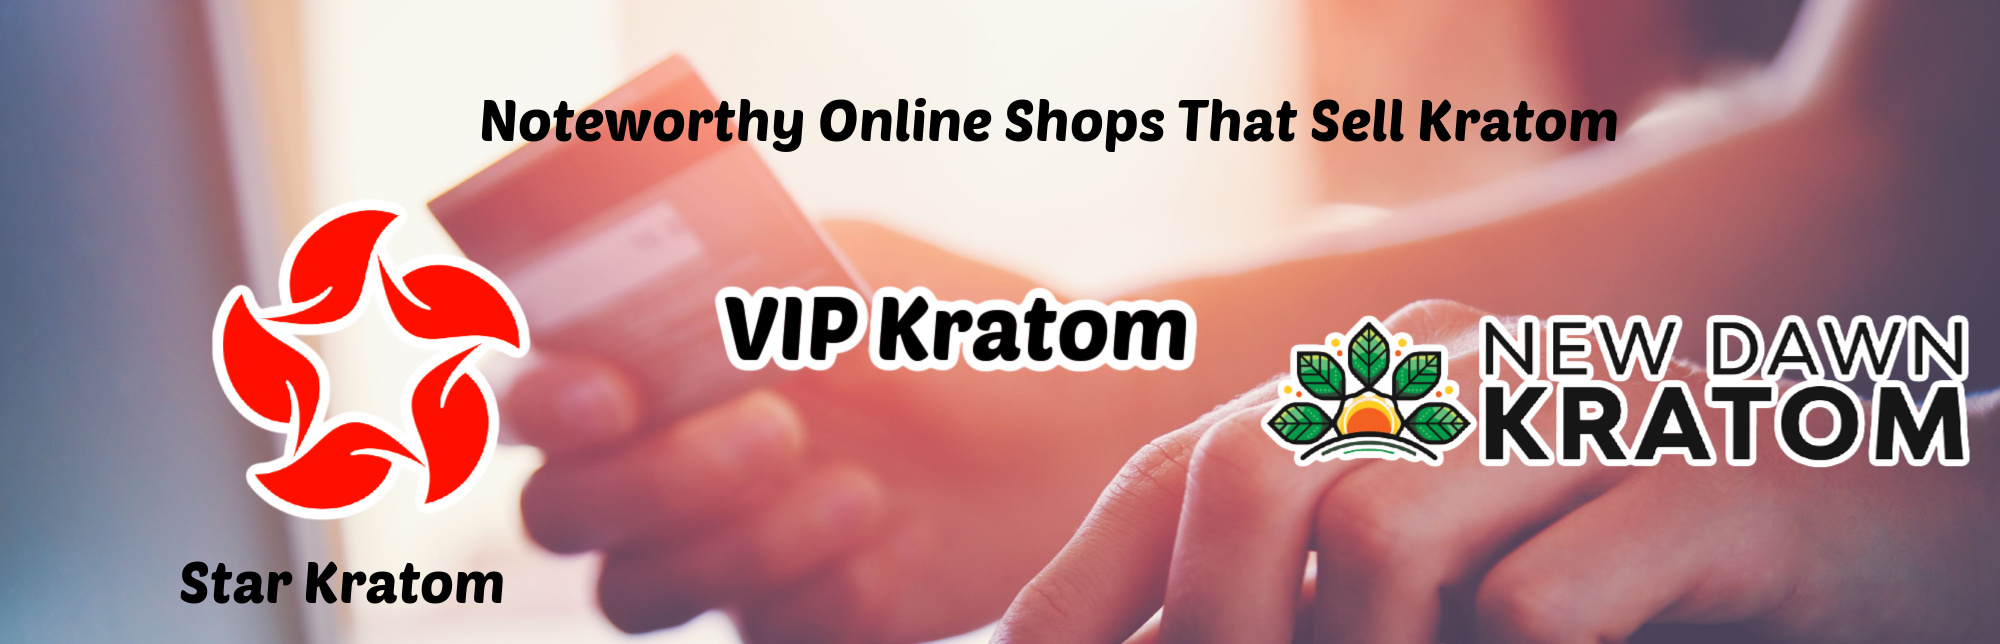 image of noteworthy online shops that sell kratom